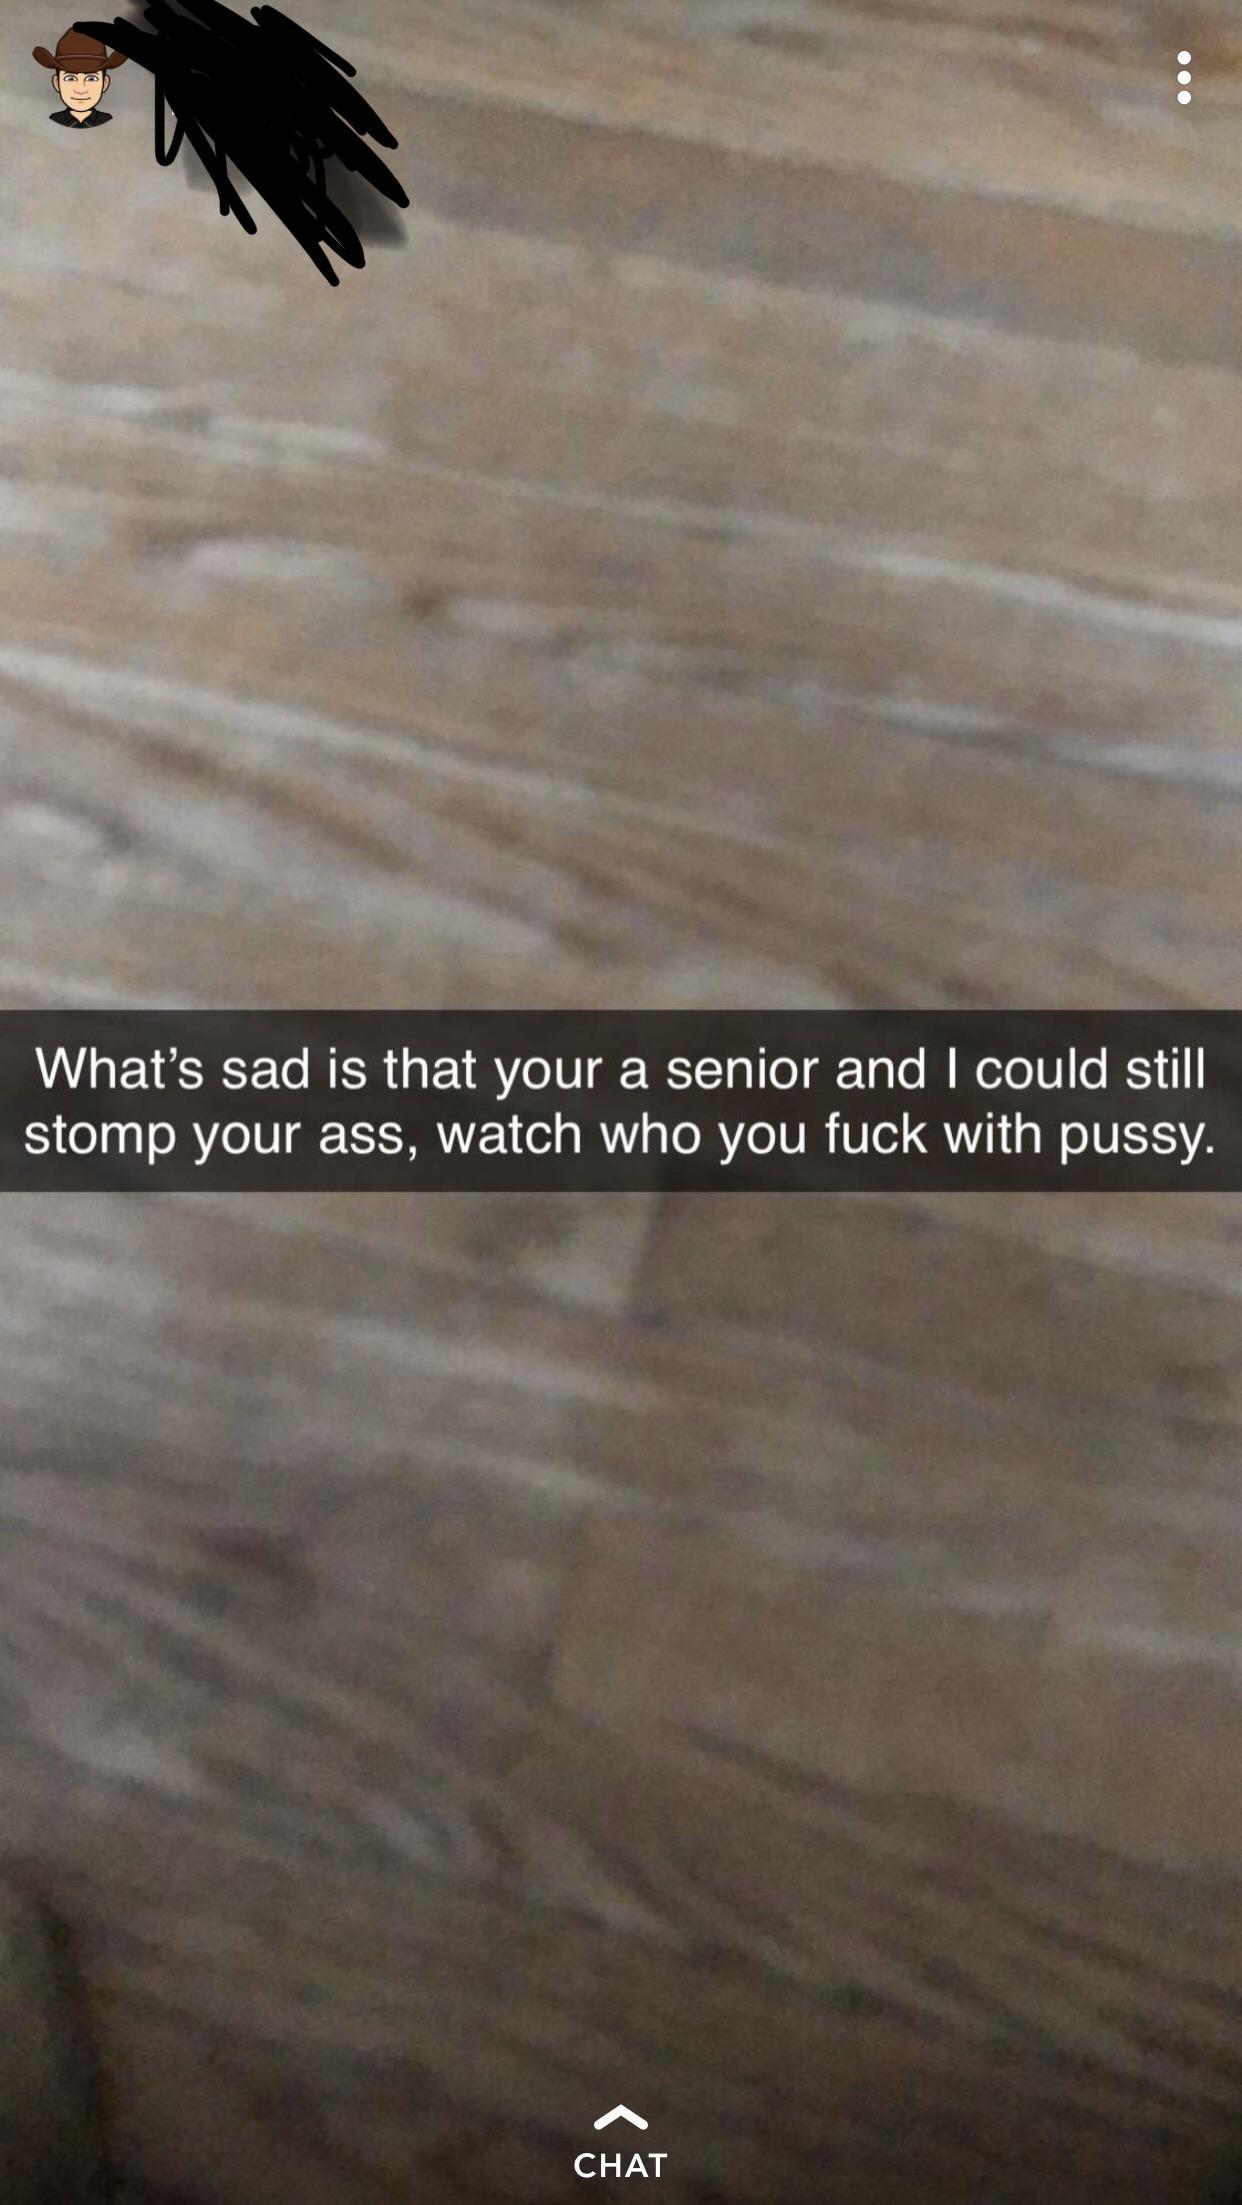 floor - What's sad is that your a senior and I could still stomp your ass, watch who you fuck with pussy. Chat